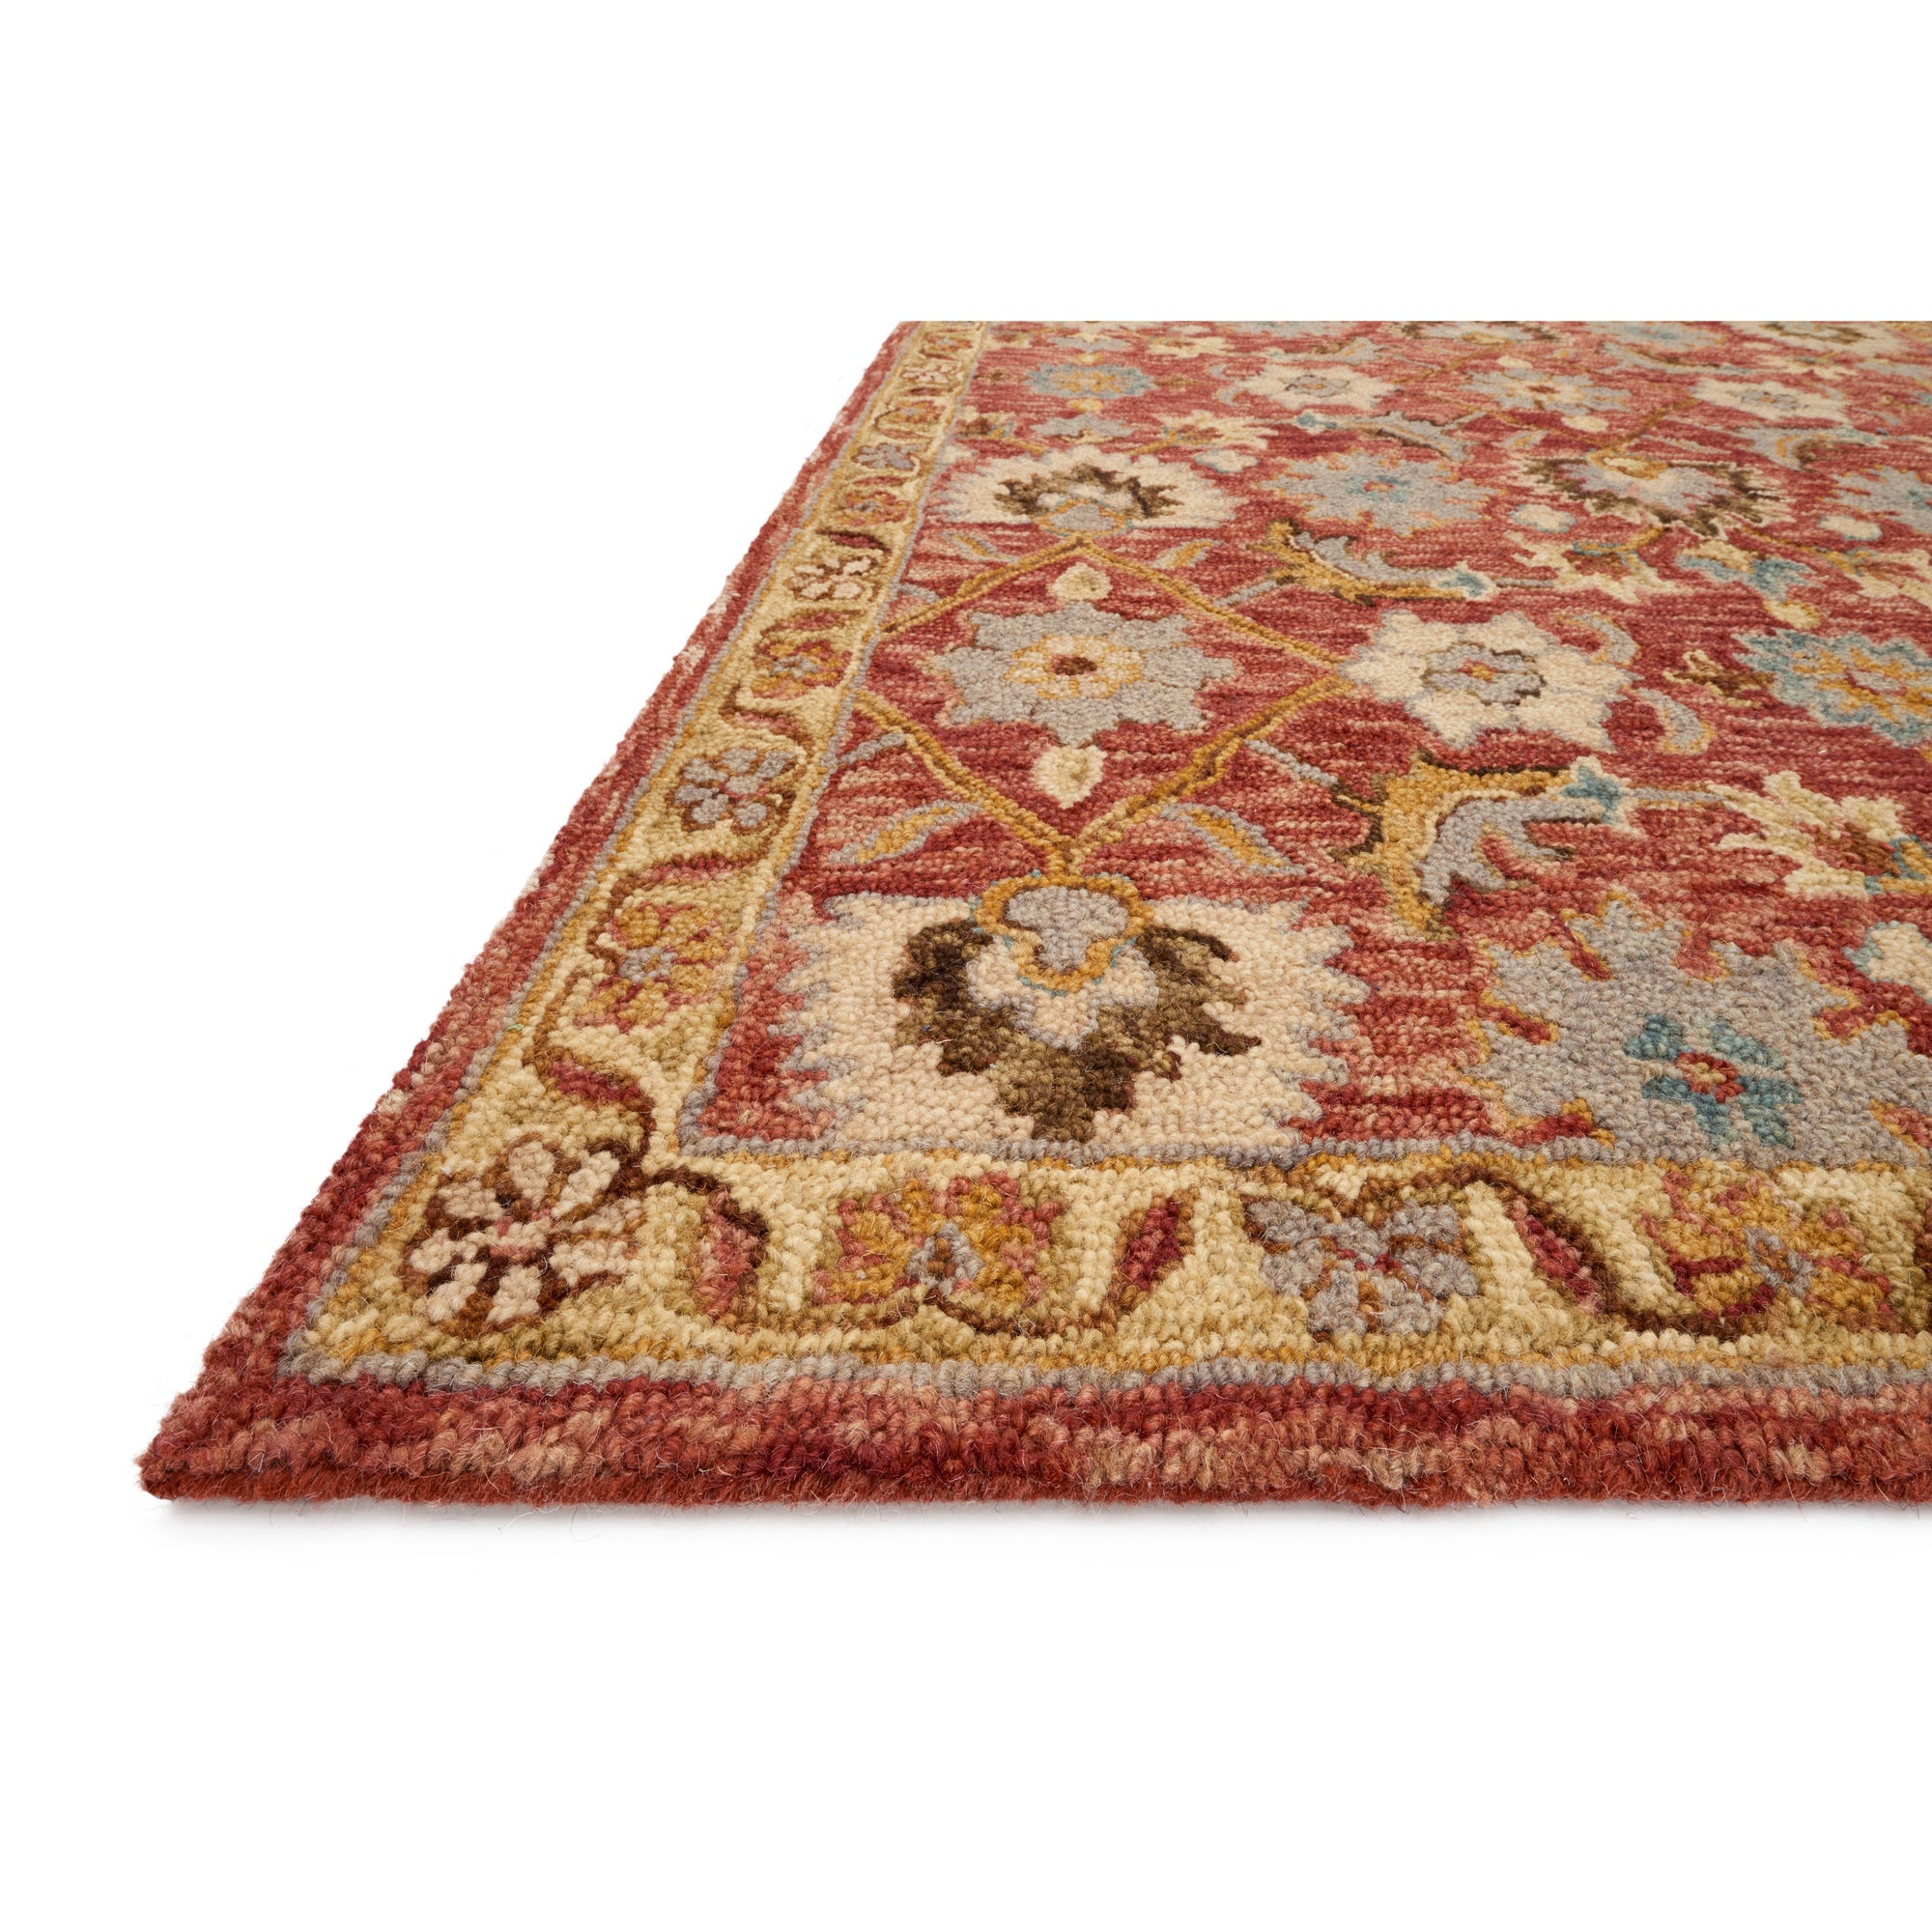 Rugs by Roo Loloi Victoria Terracotta Gold Area Rug in size 18" x 18" Sample